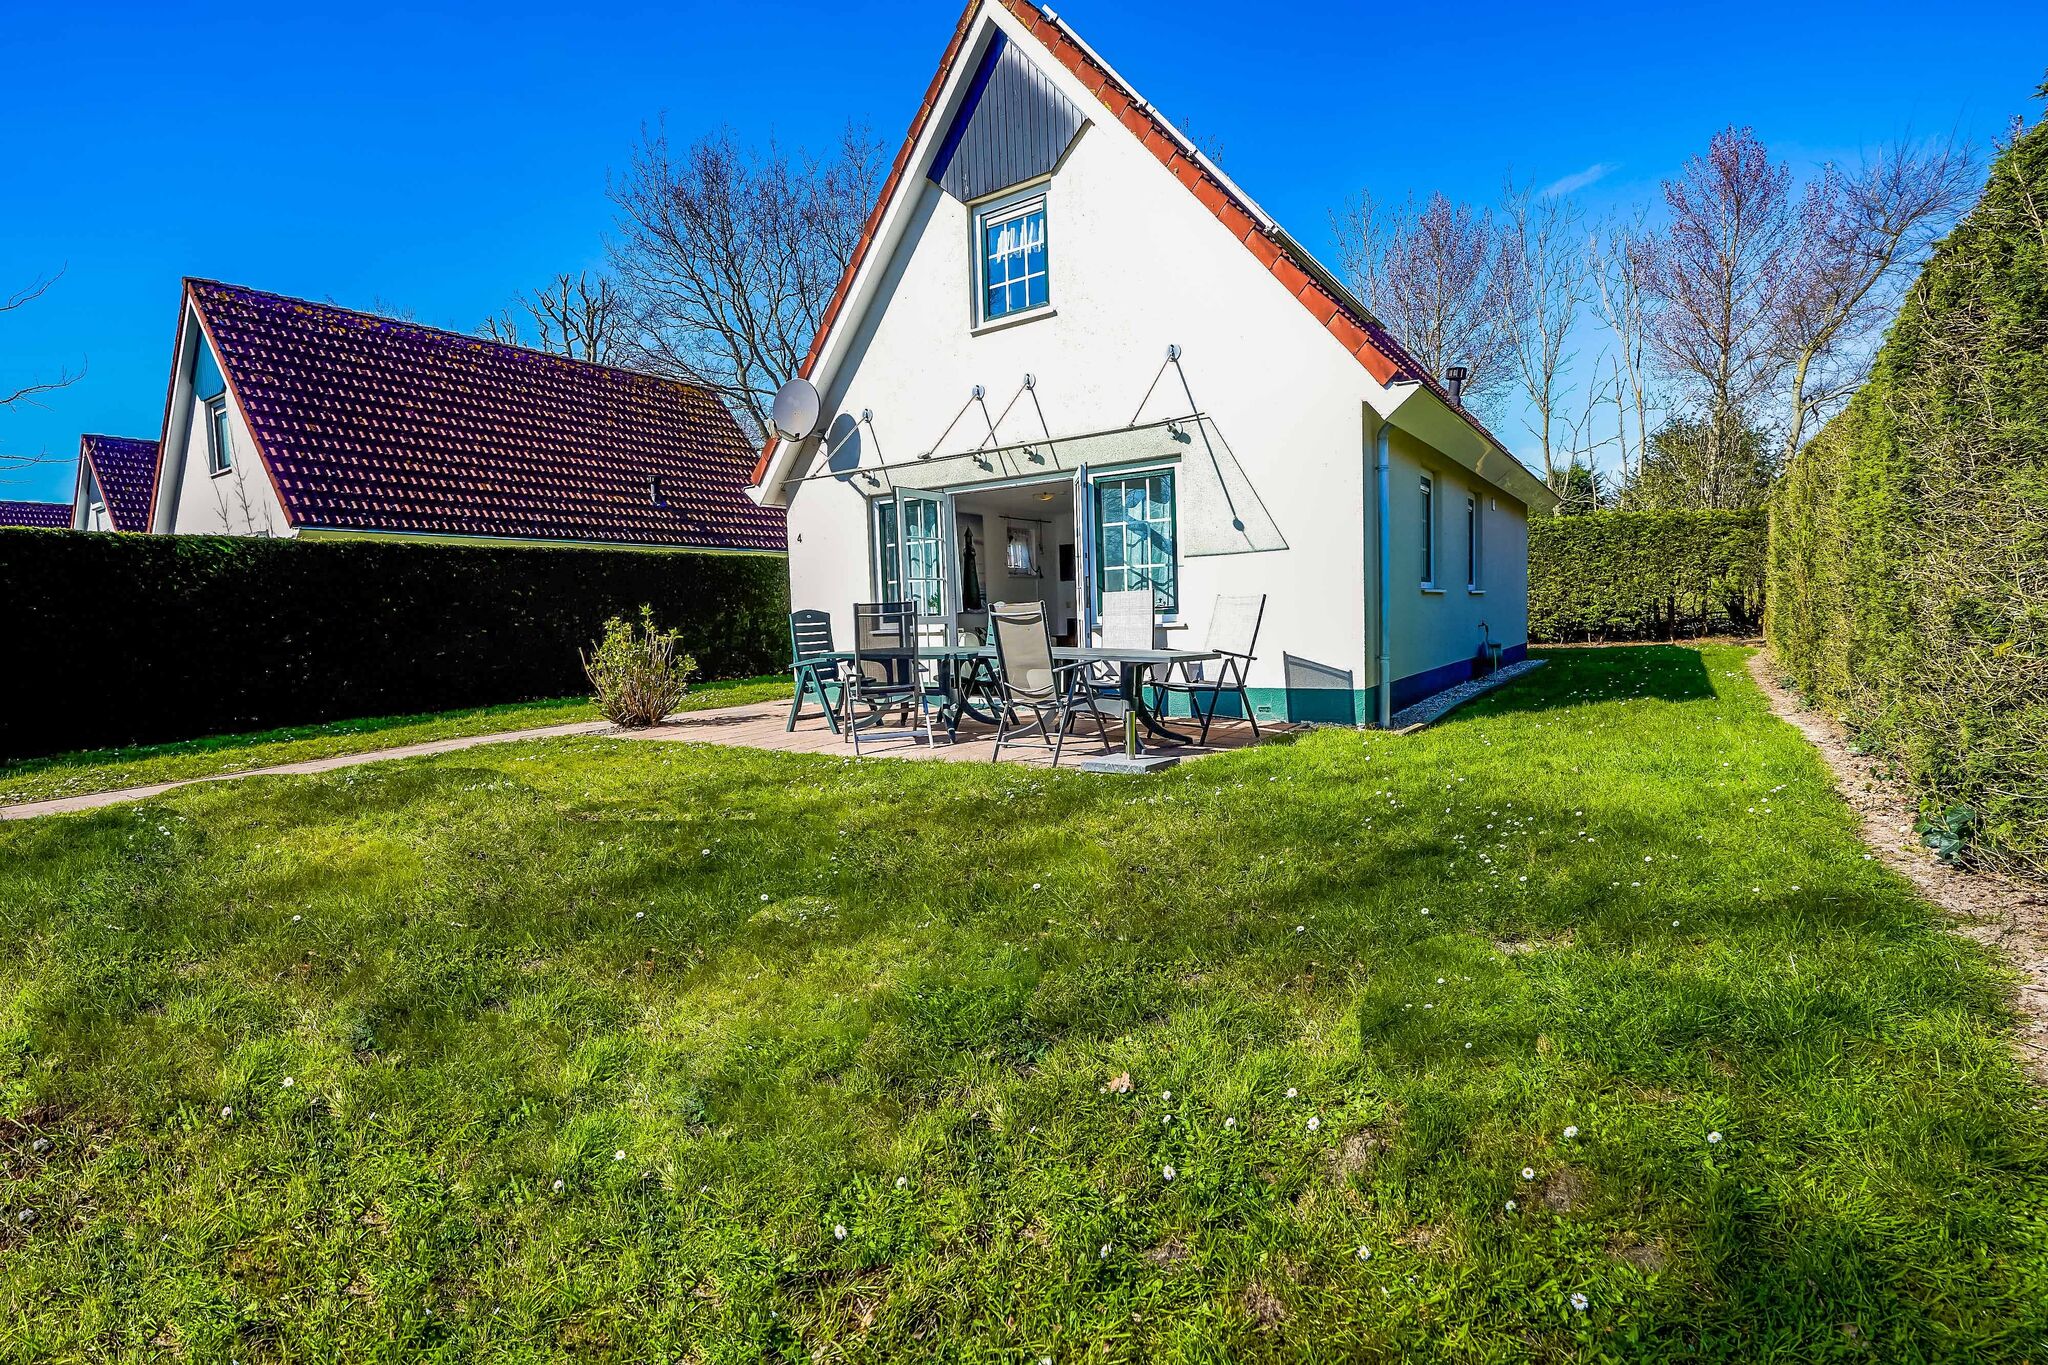 Detached holiday home for 6 people close to the Veerse Meer and marina